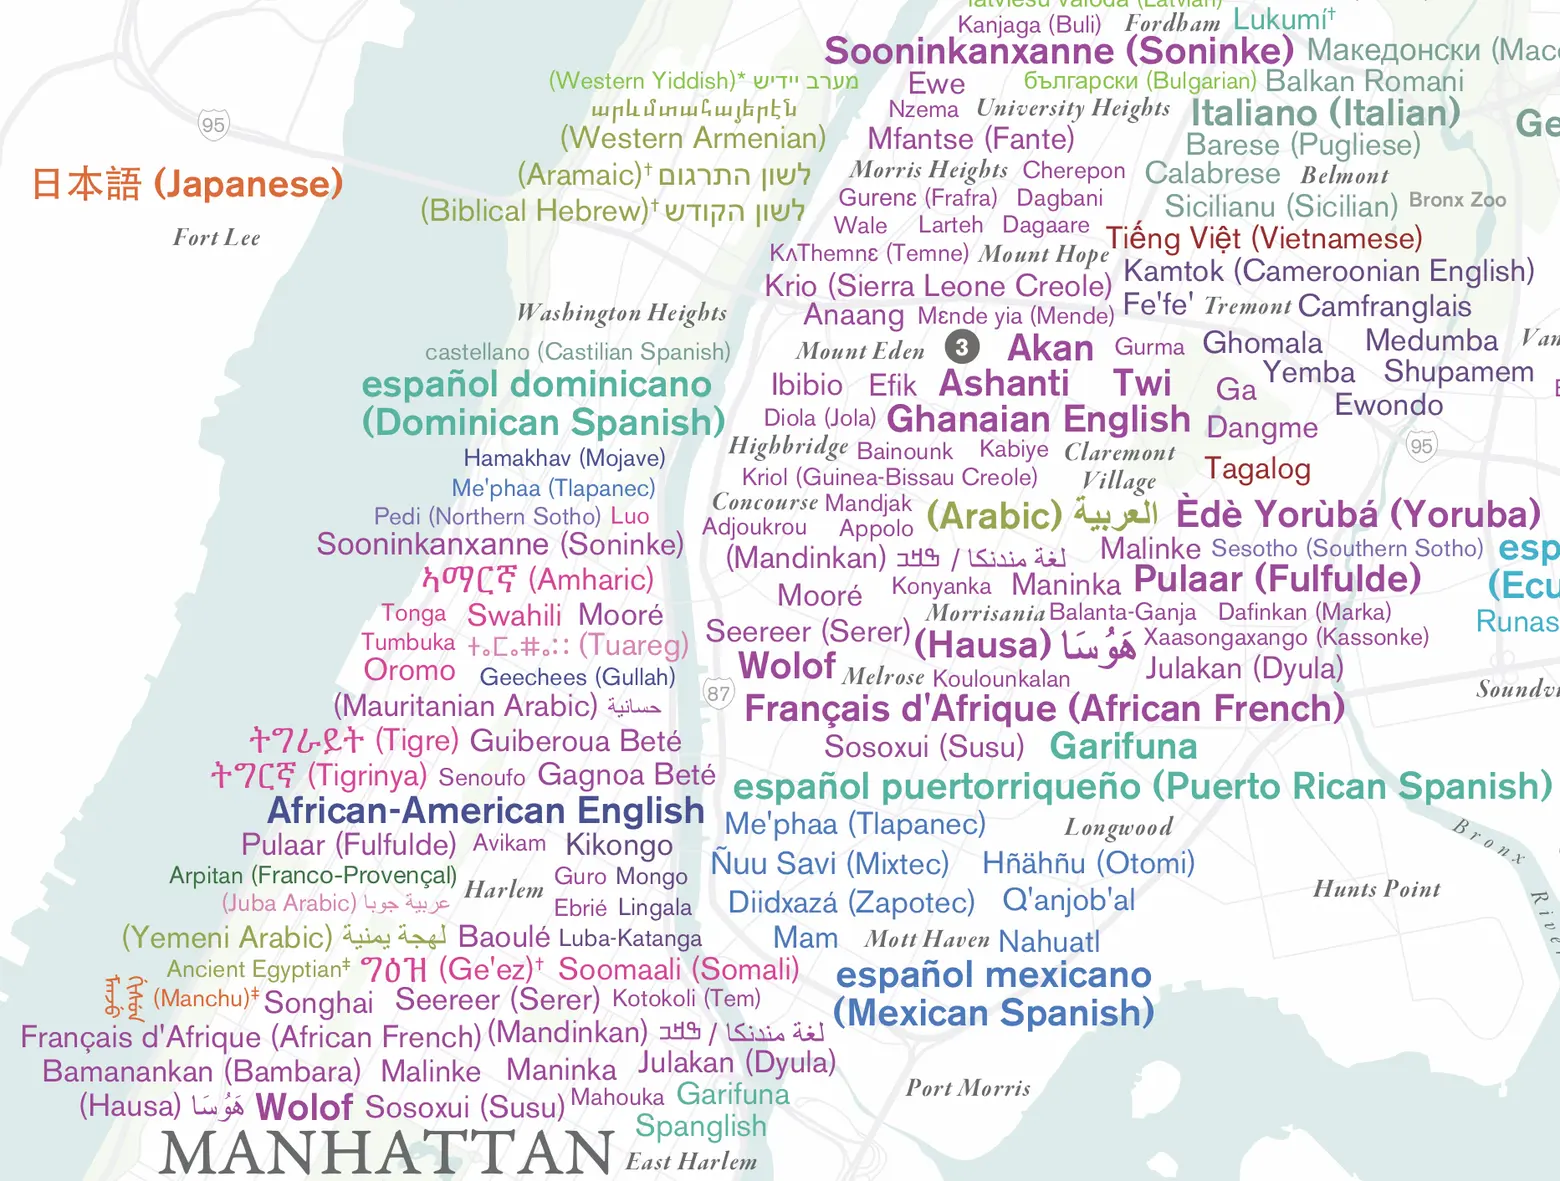 New map shows over 600 languages spoken in NYC